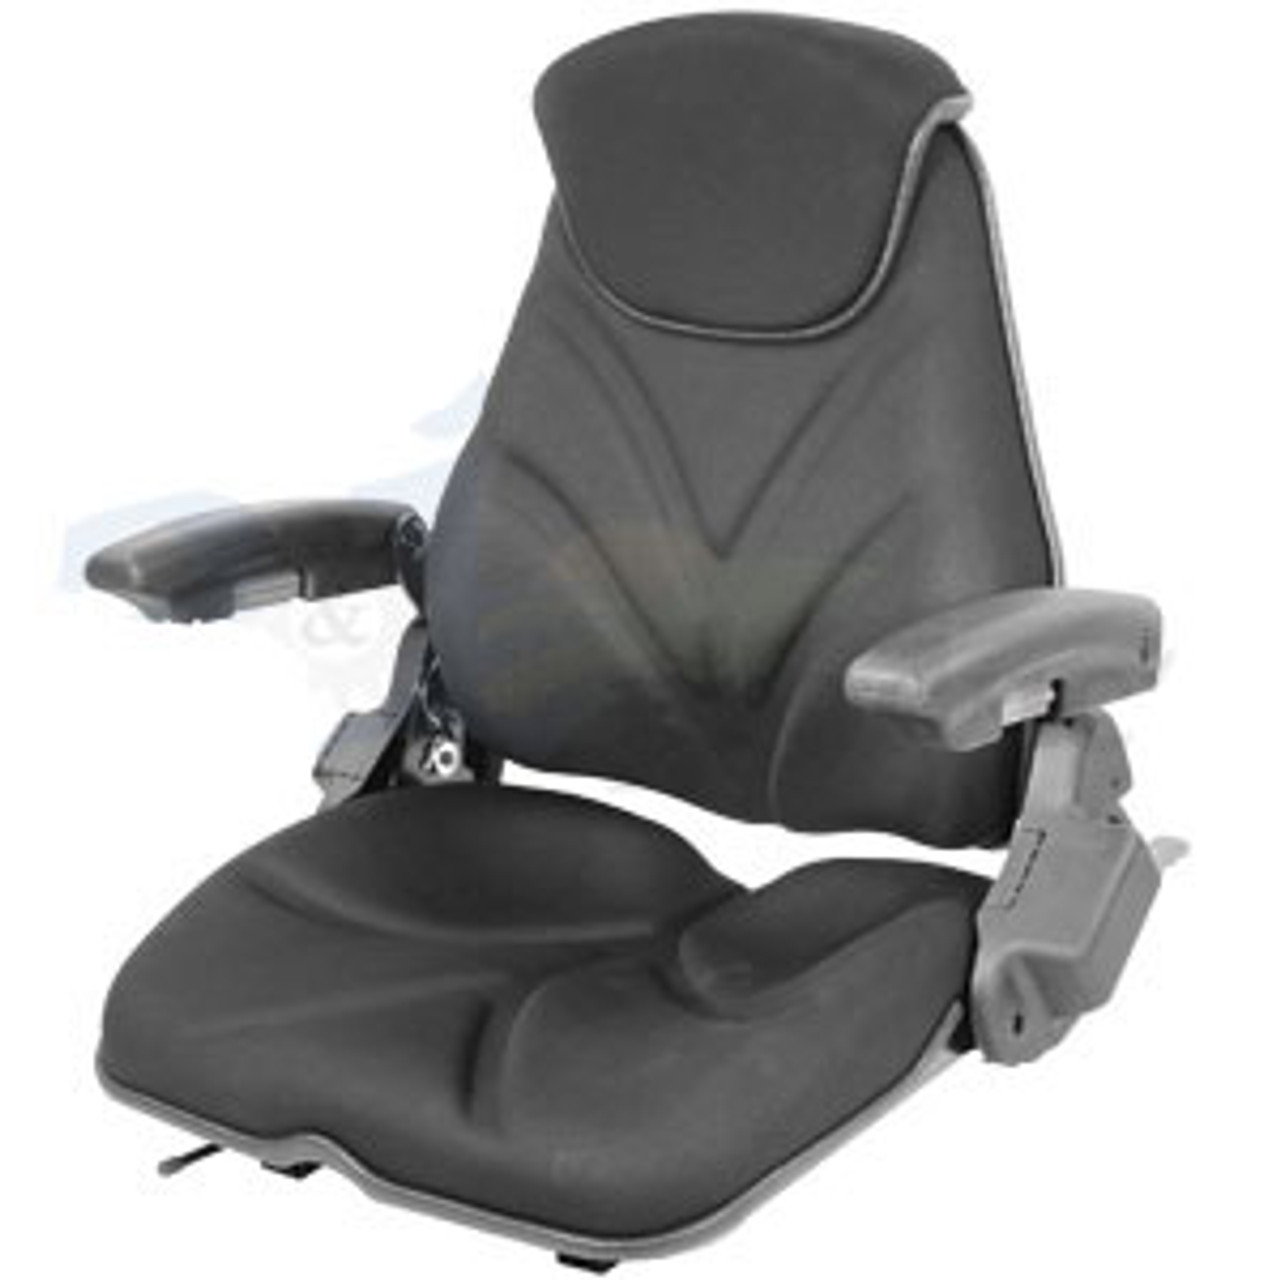 Gleaner Combine Tractor Seat A-F20ST145  F20 Series, Slide Track / Arm Rest / Head Rest / Black Cloth